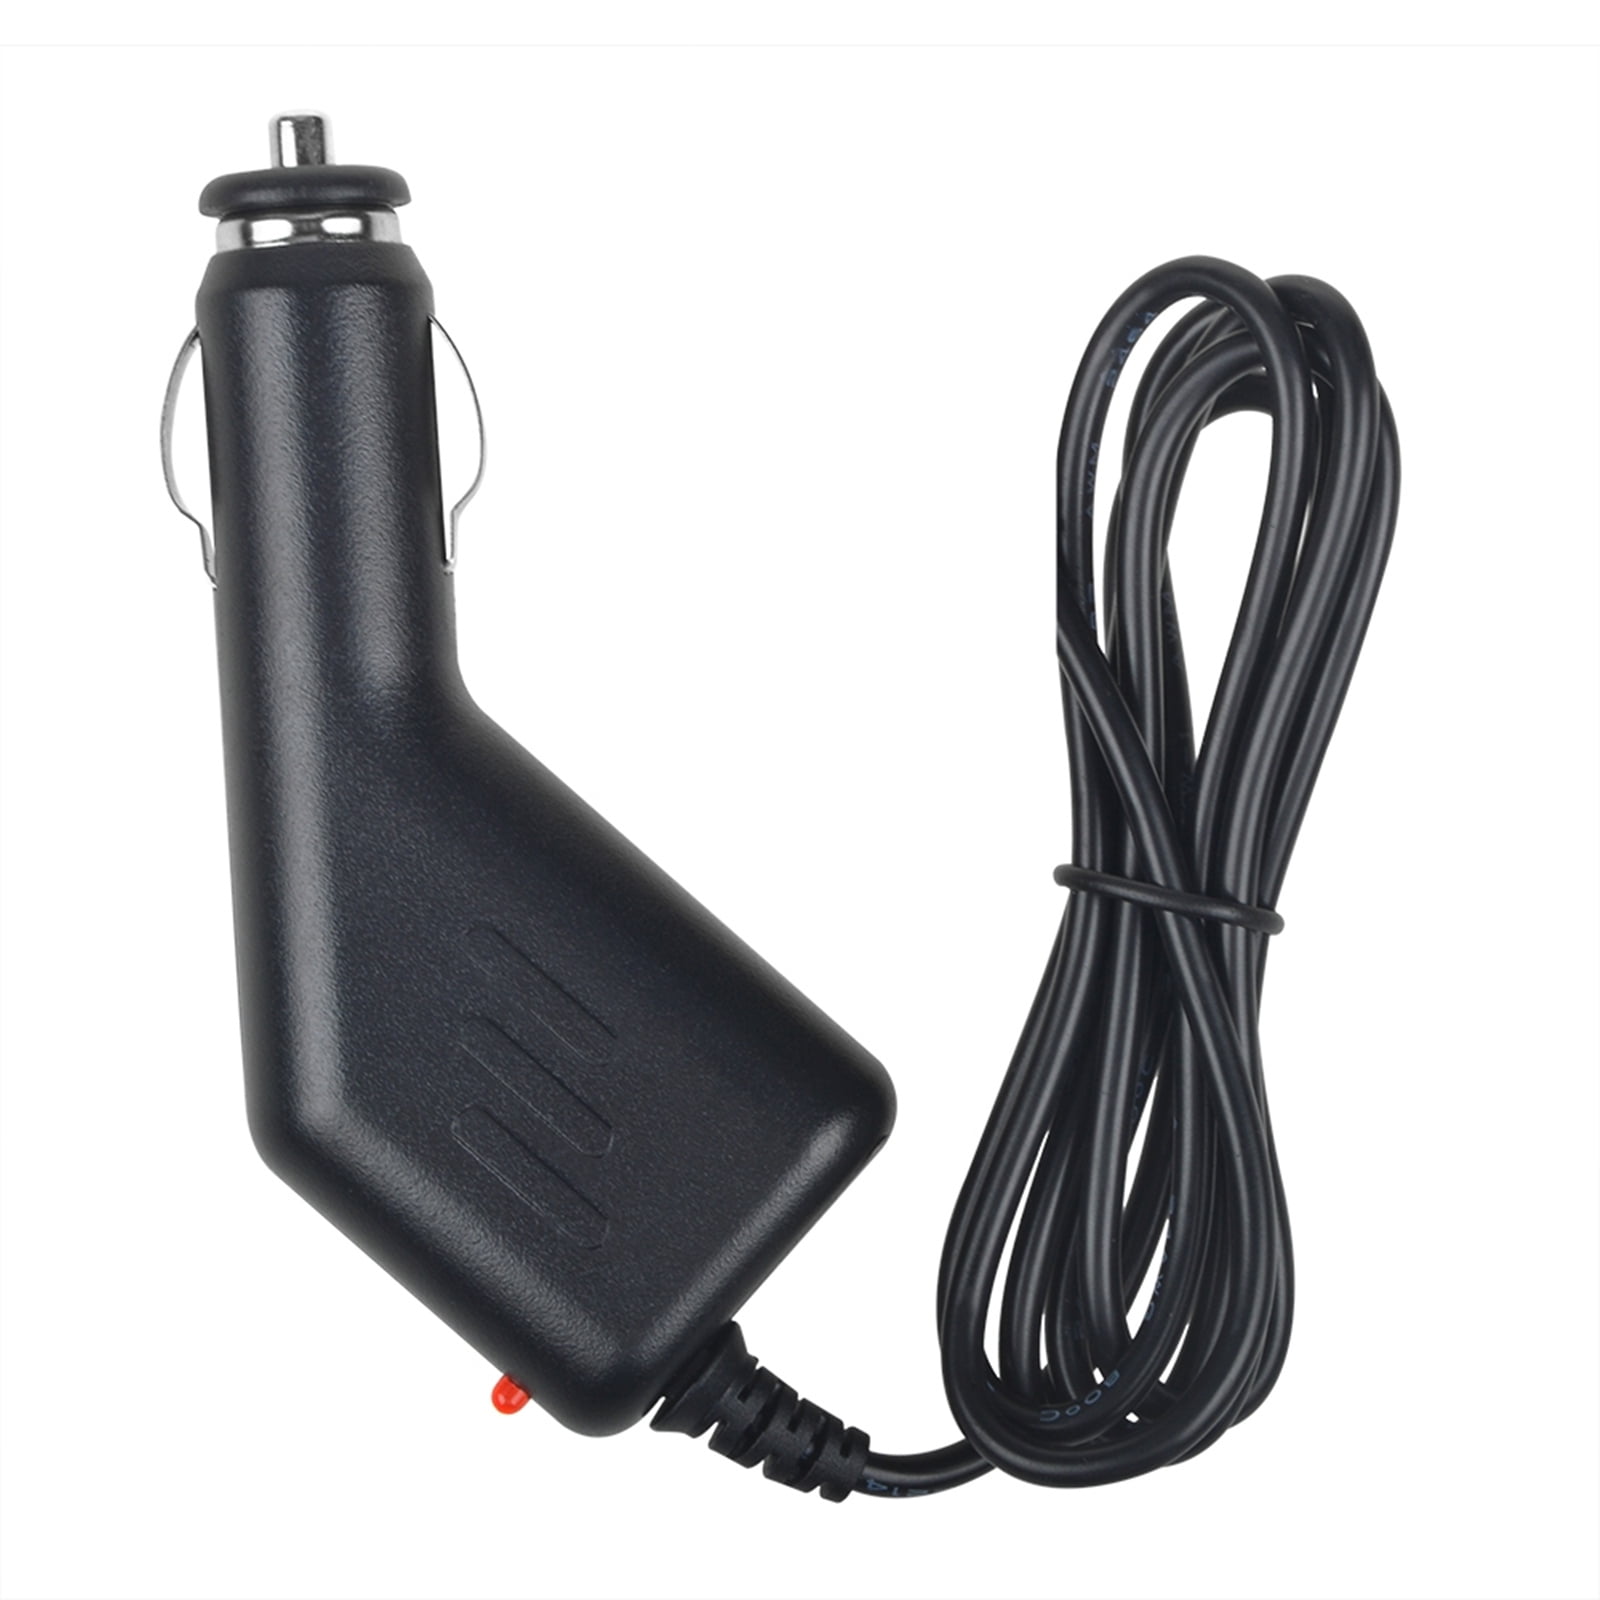 Car Charger Power Supply Adapter Cord For Magellan GPS Roadmate RM 5236 T-LM 